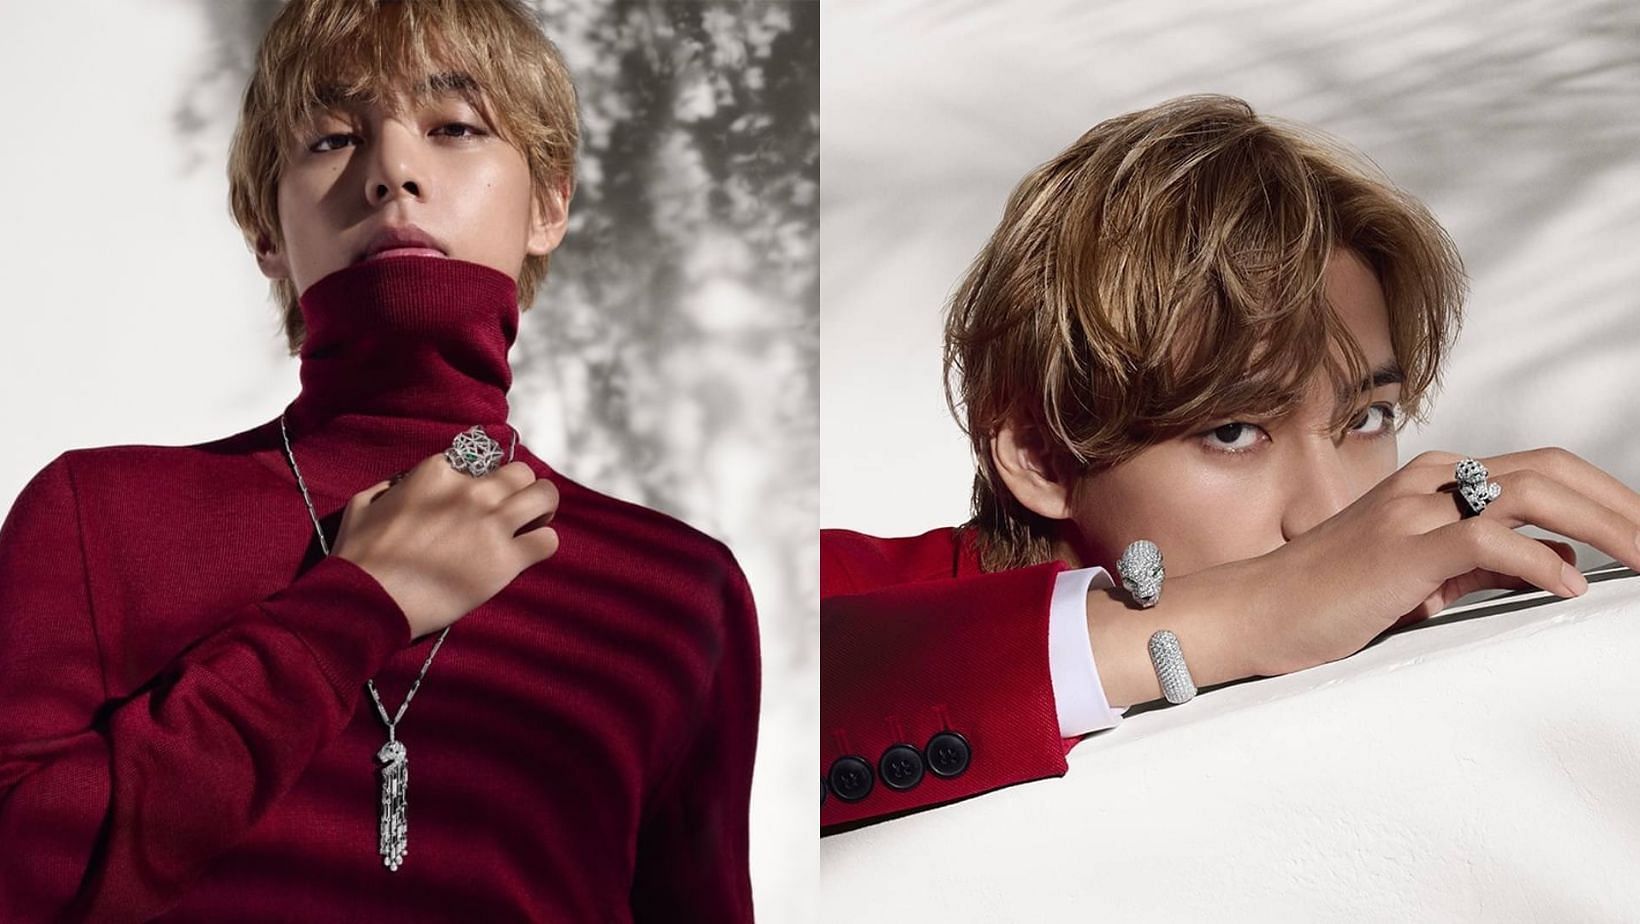 &quot;Ethereal, Elegant&quot;: Fans swoon over Taehyung